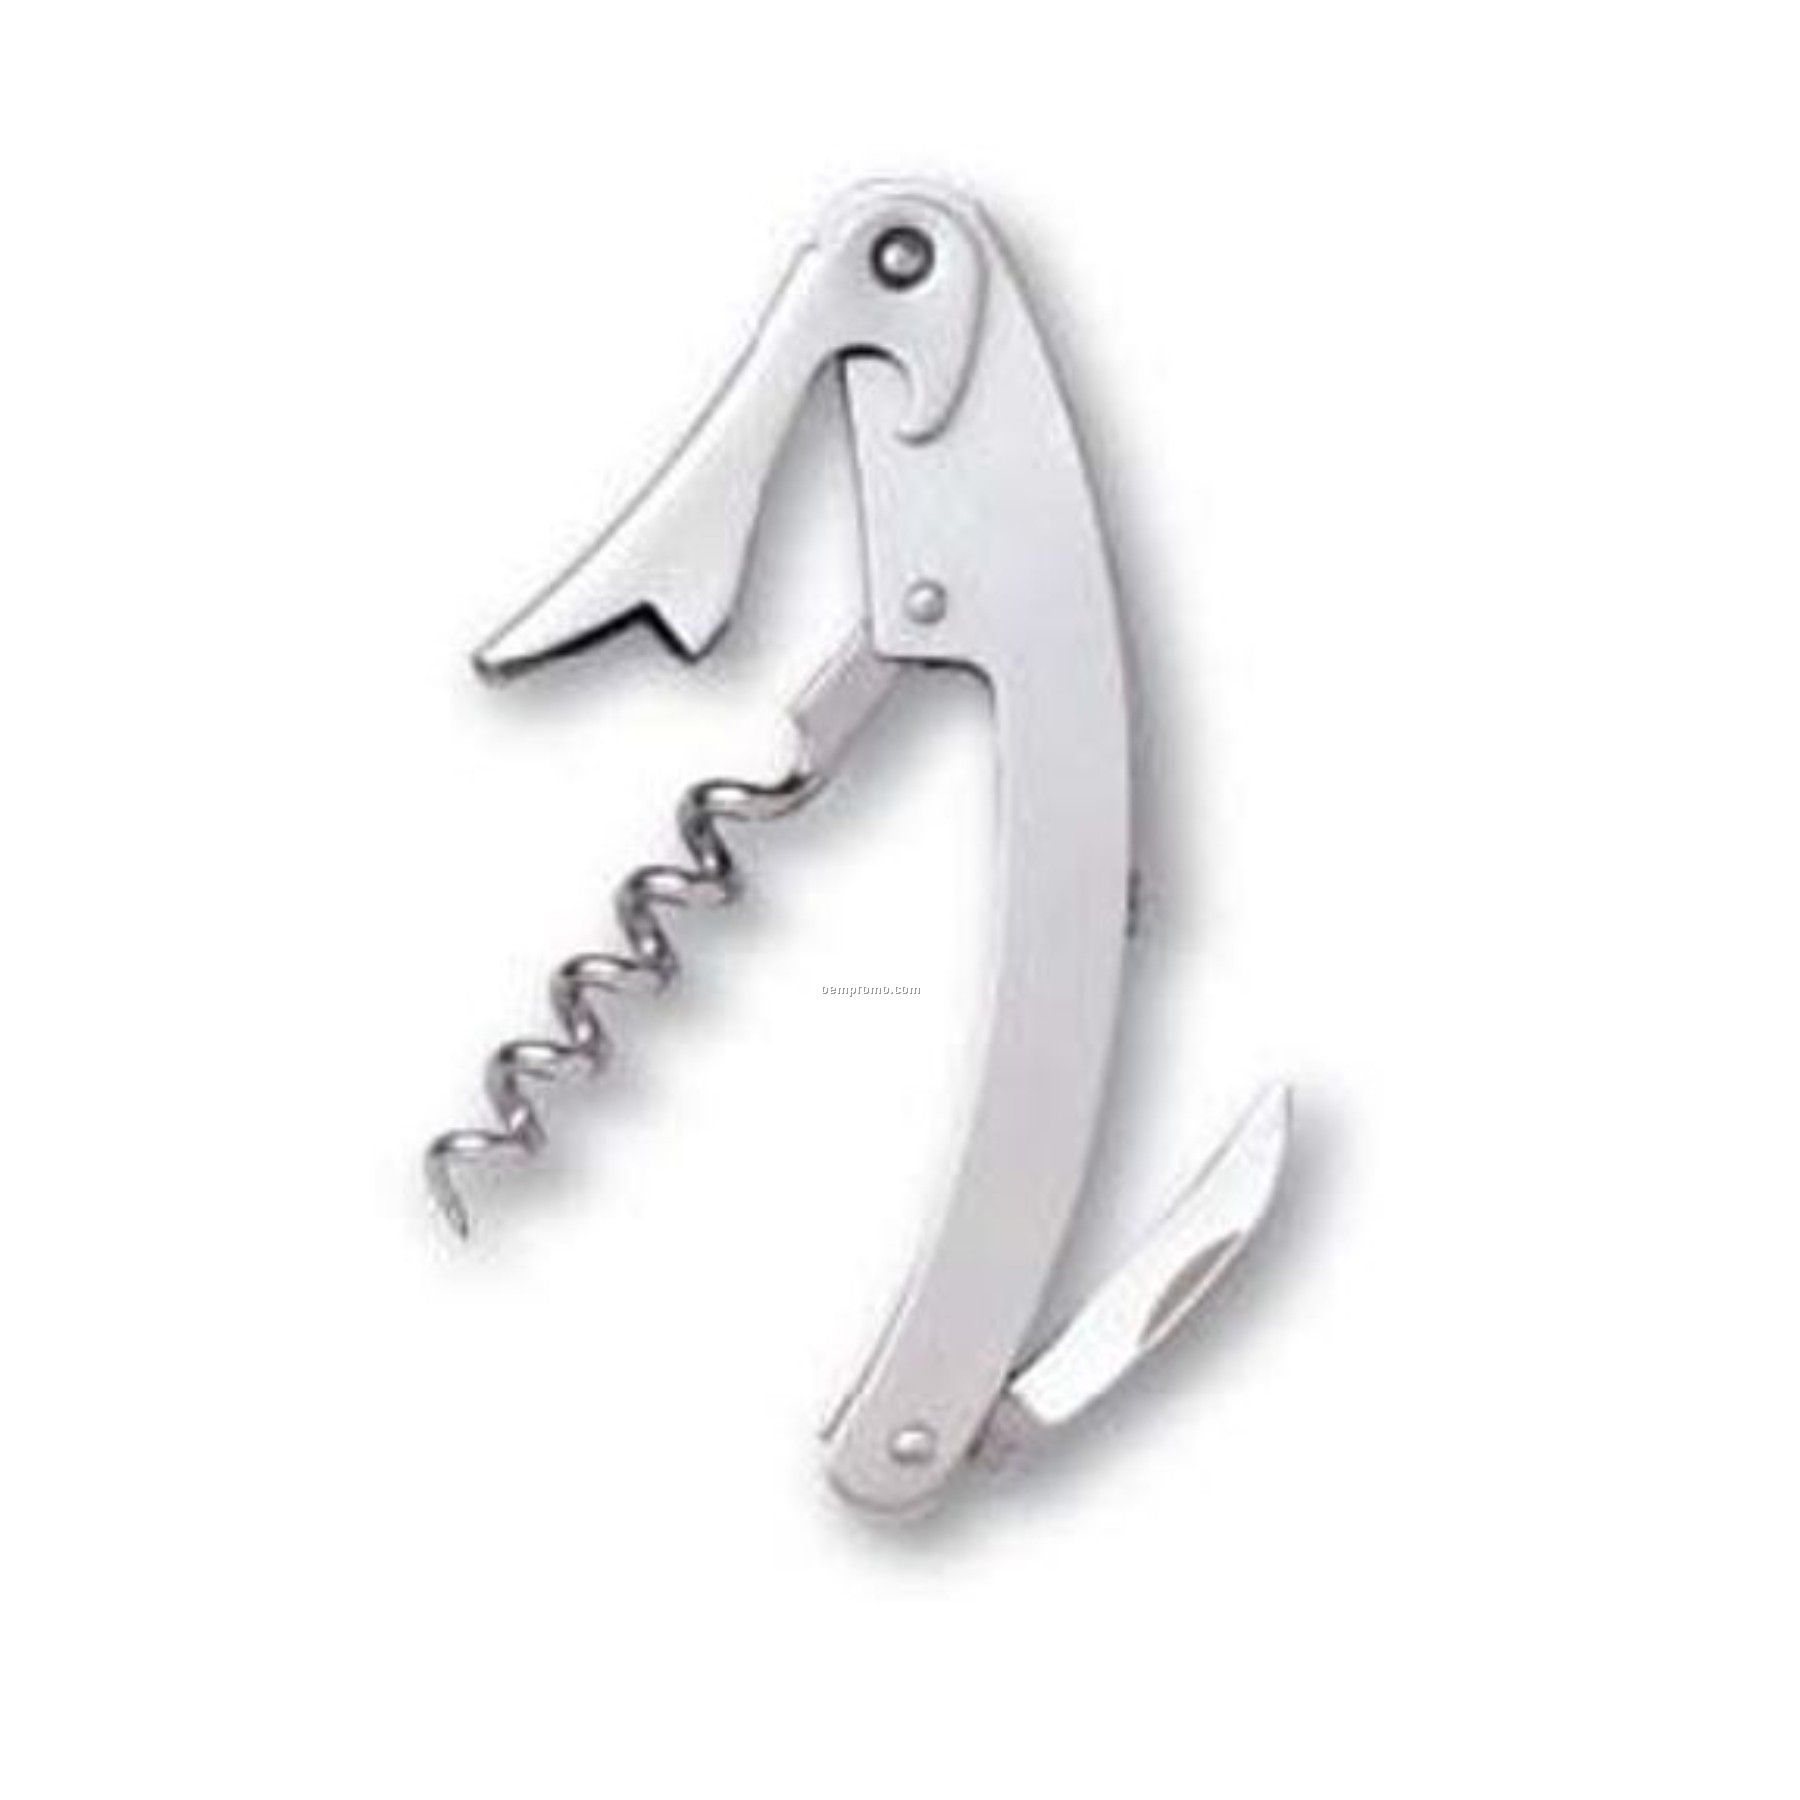 Curved Stainless Steel Corkscrew- Laser Engraved